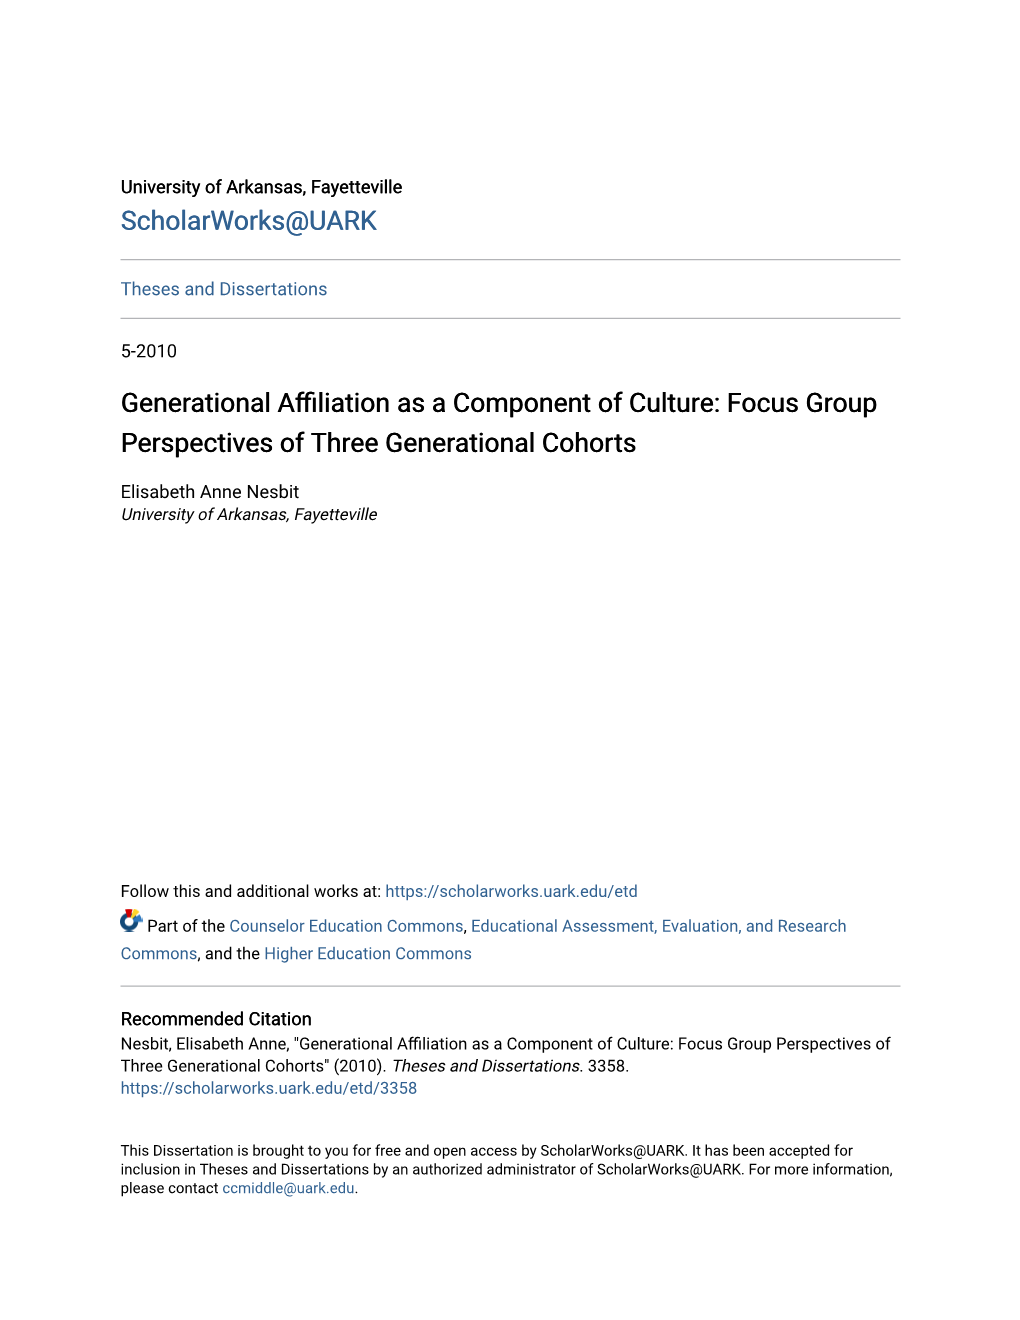 Generational Affiliation As a Component of Culture: Focus Group Perspectives of Three Generational Cohorts